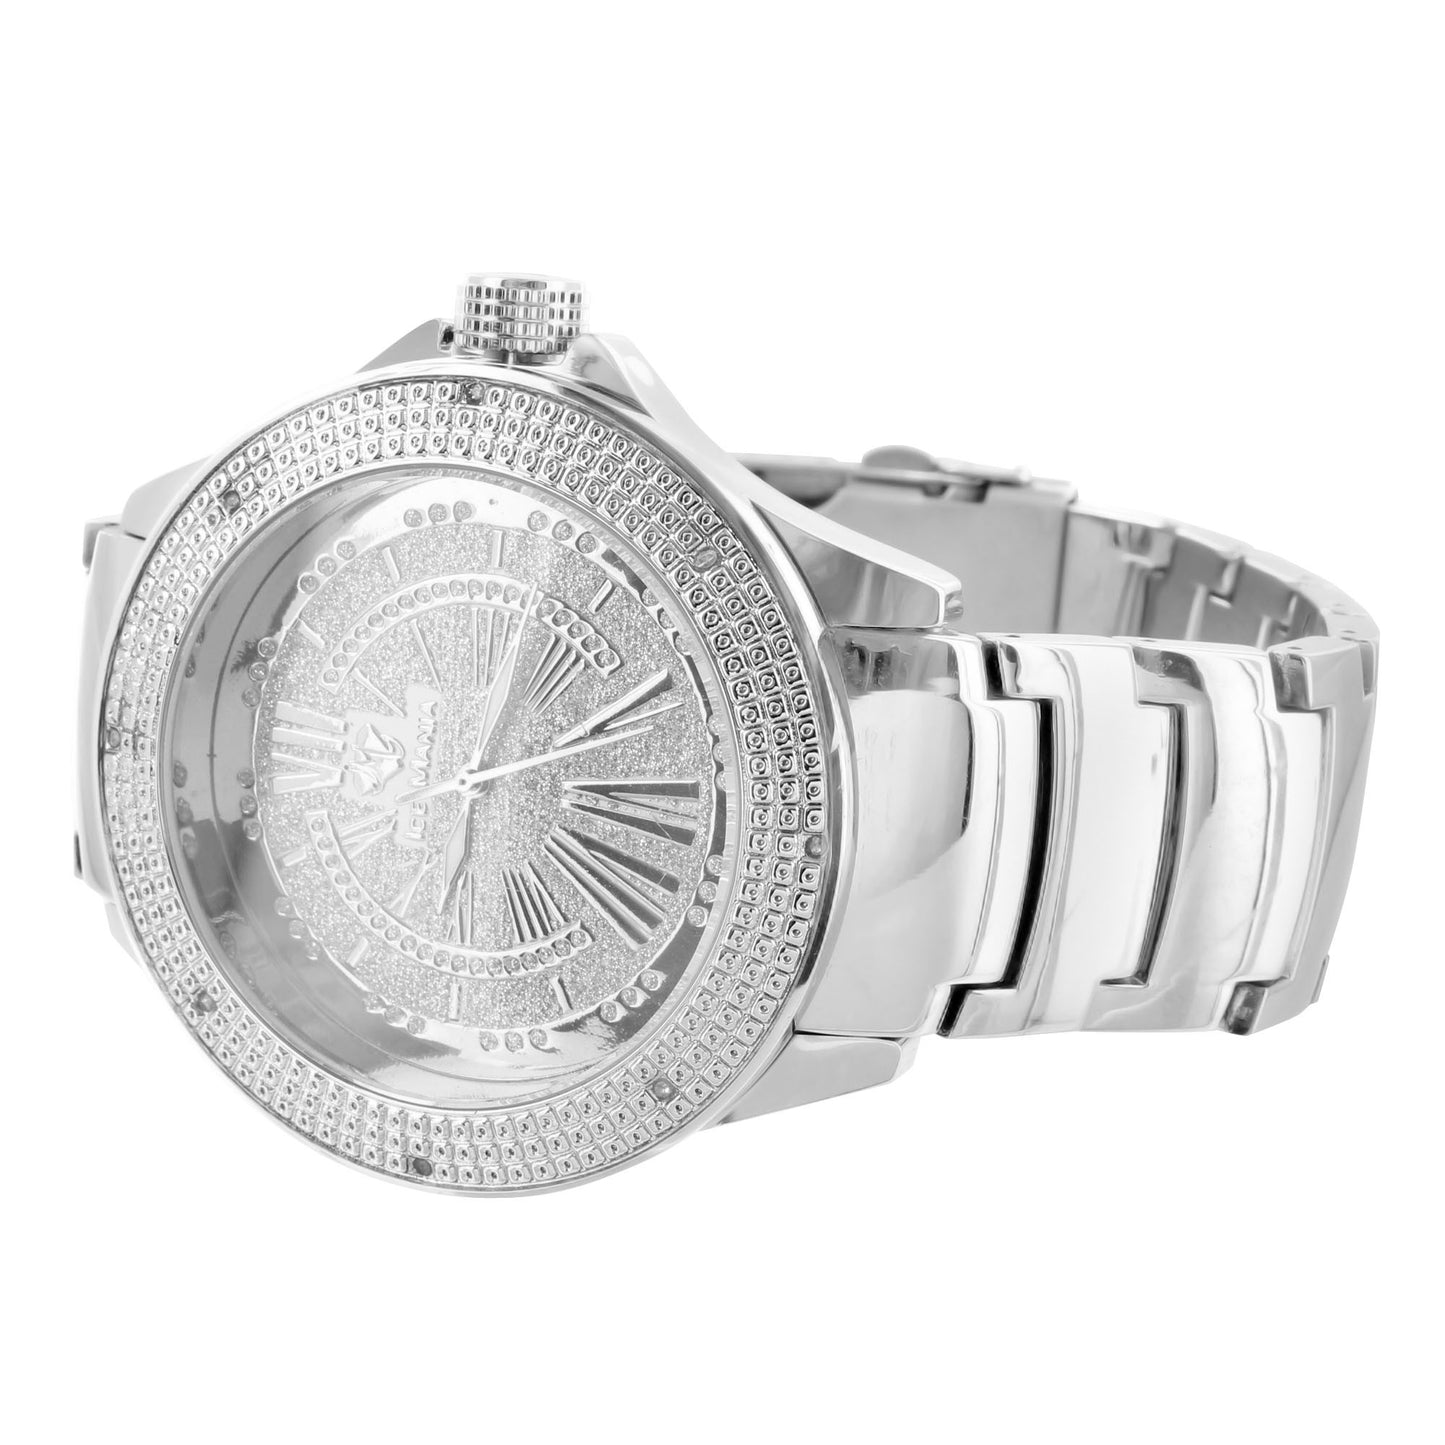 Roman Numeral 14k White Gold Finish Real Diamond Watch With Metal Band